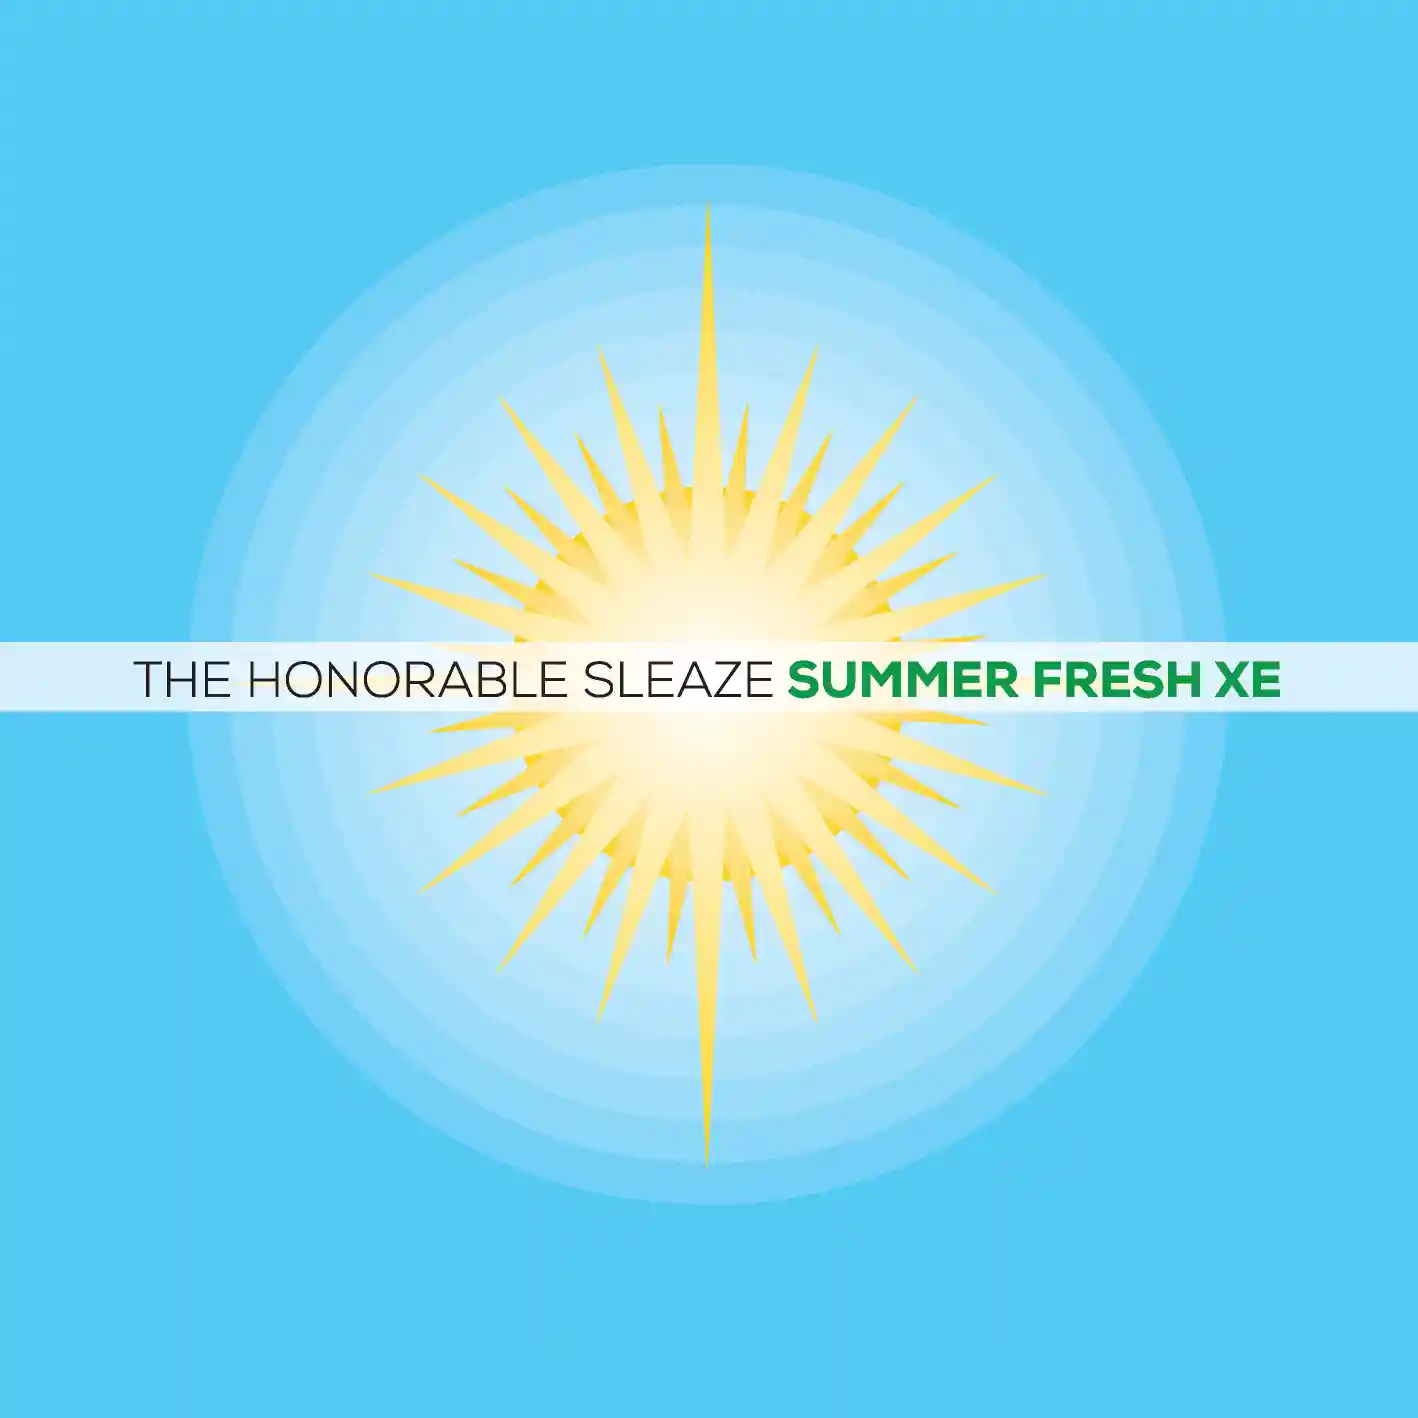 Album cover for “Summer Fresh XE” by The Honorable Sleaze